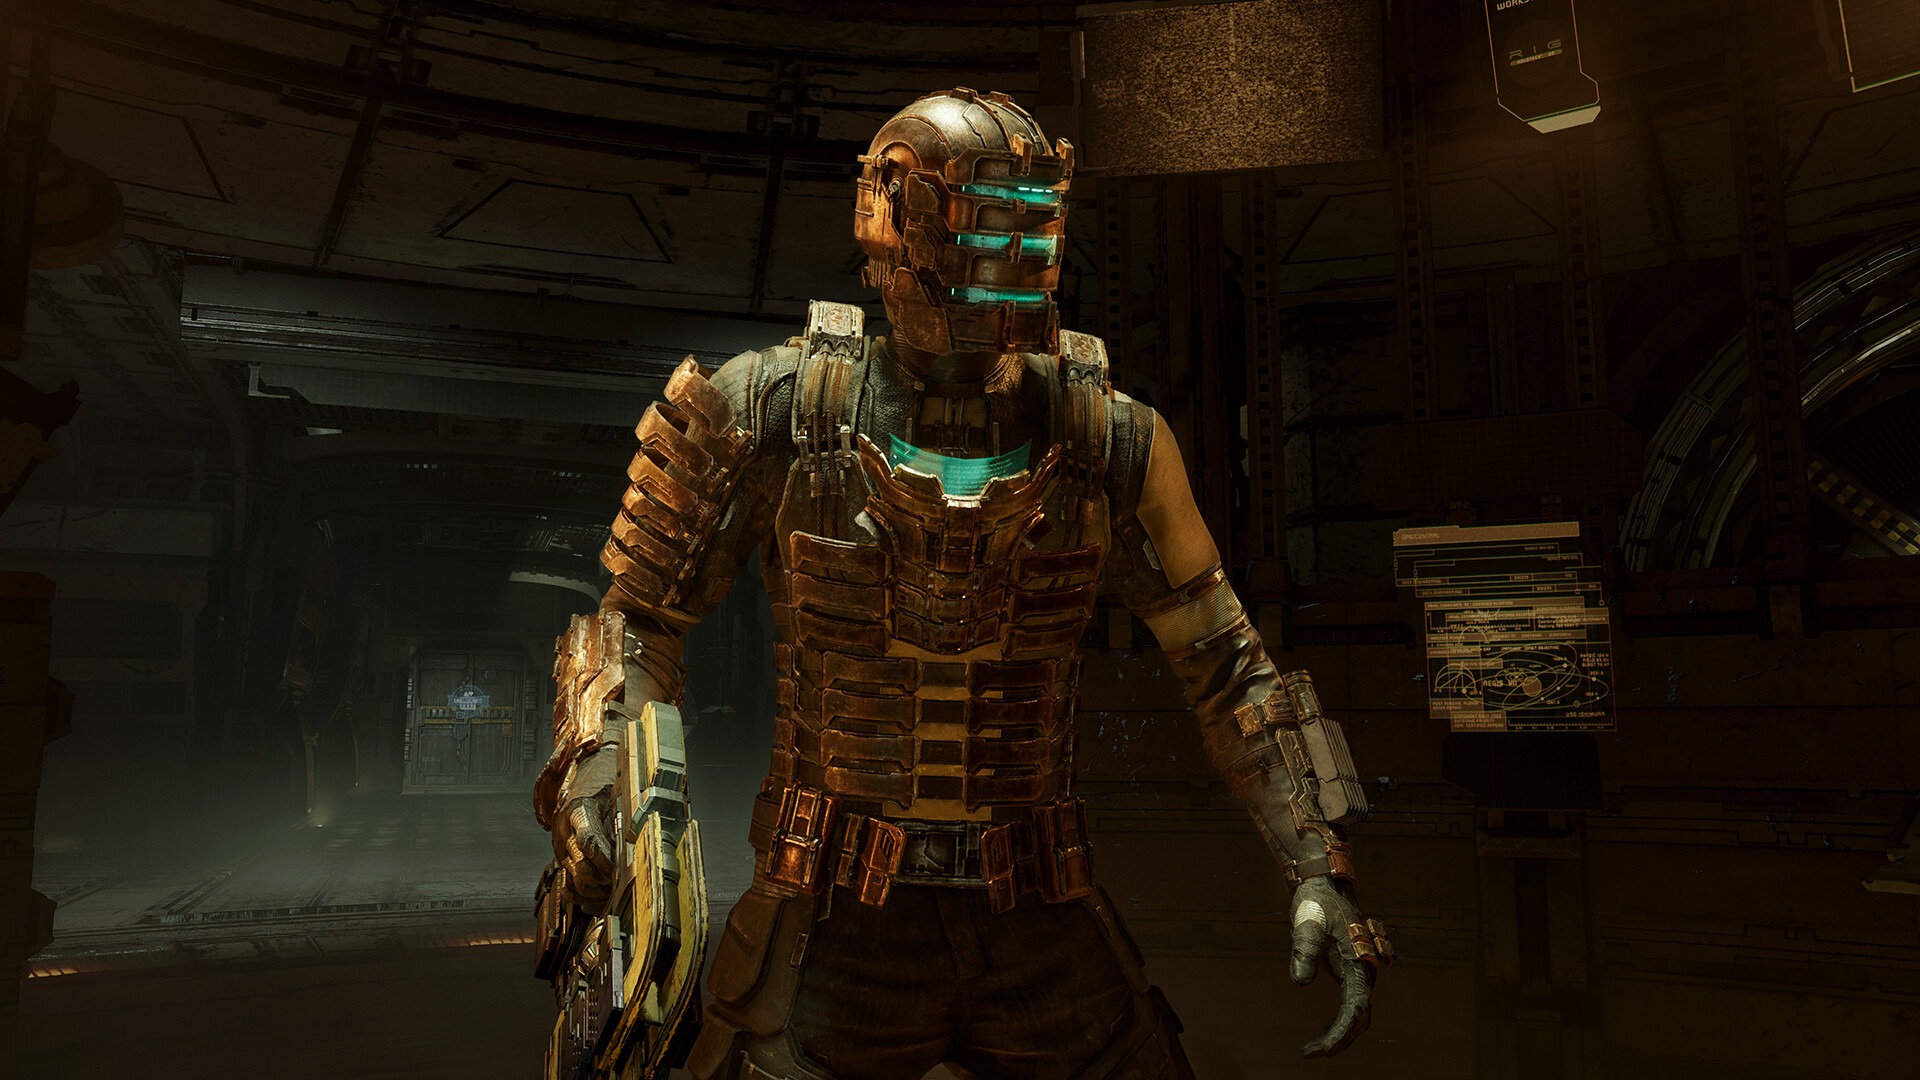 Dead Space remake: all suit upgrades, locations, and unlock